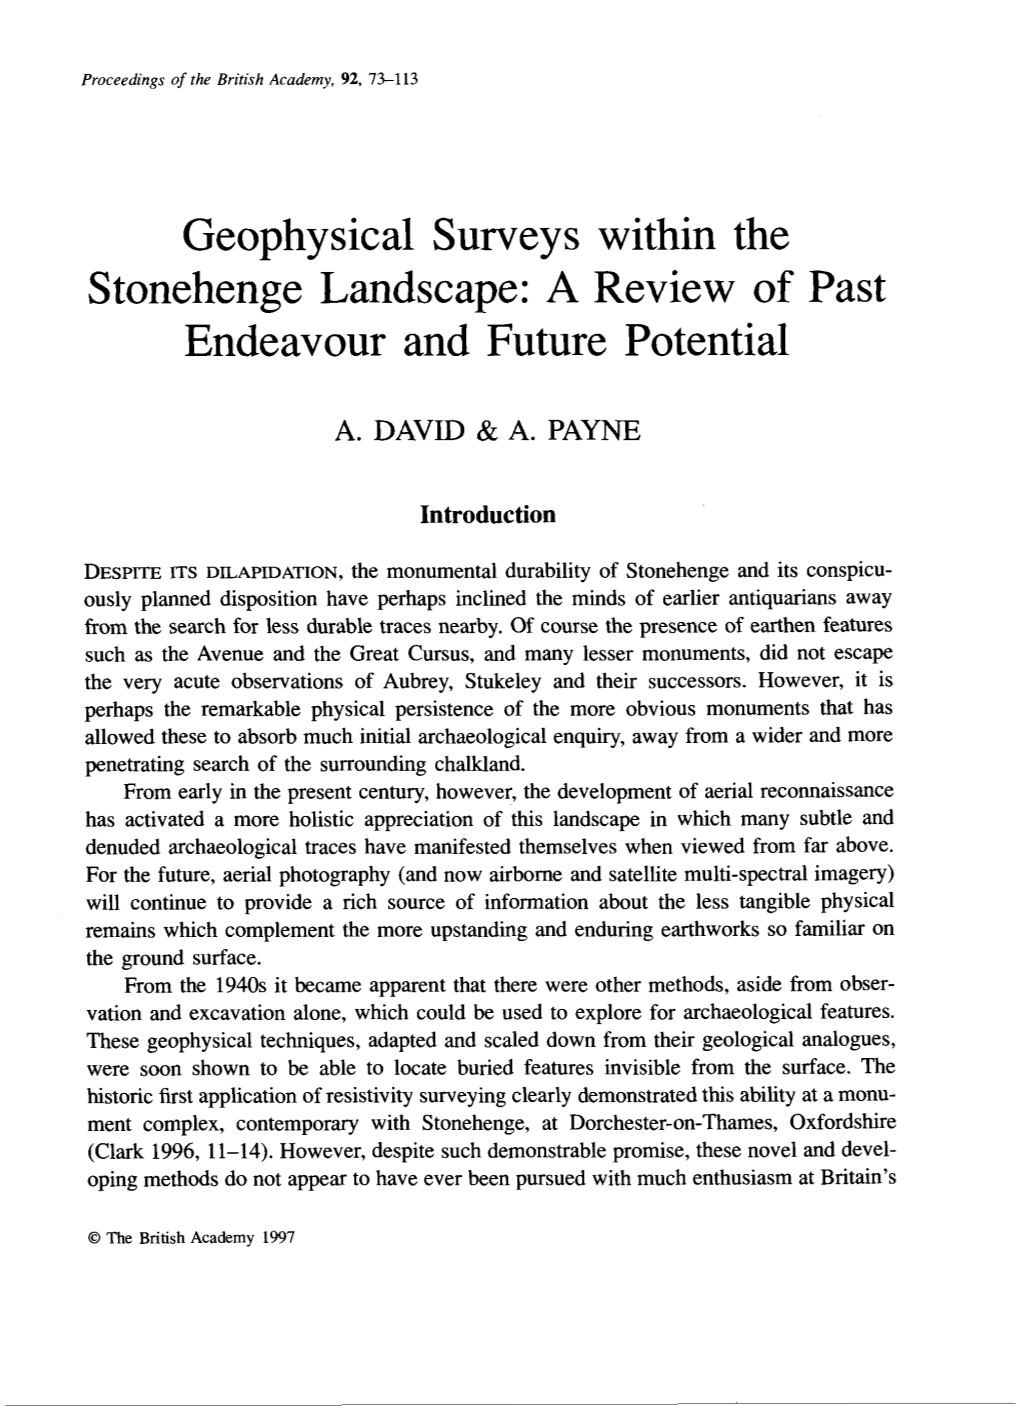 Geophysical Surveys Within the Stonehenge Landscape: a Review of Past Endeavour and Future Potential